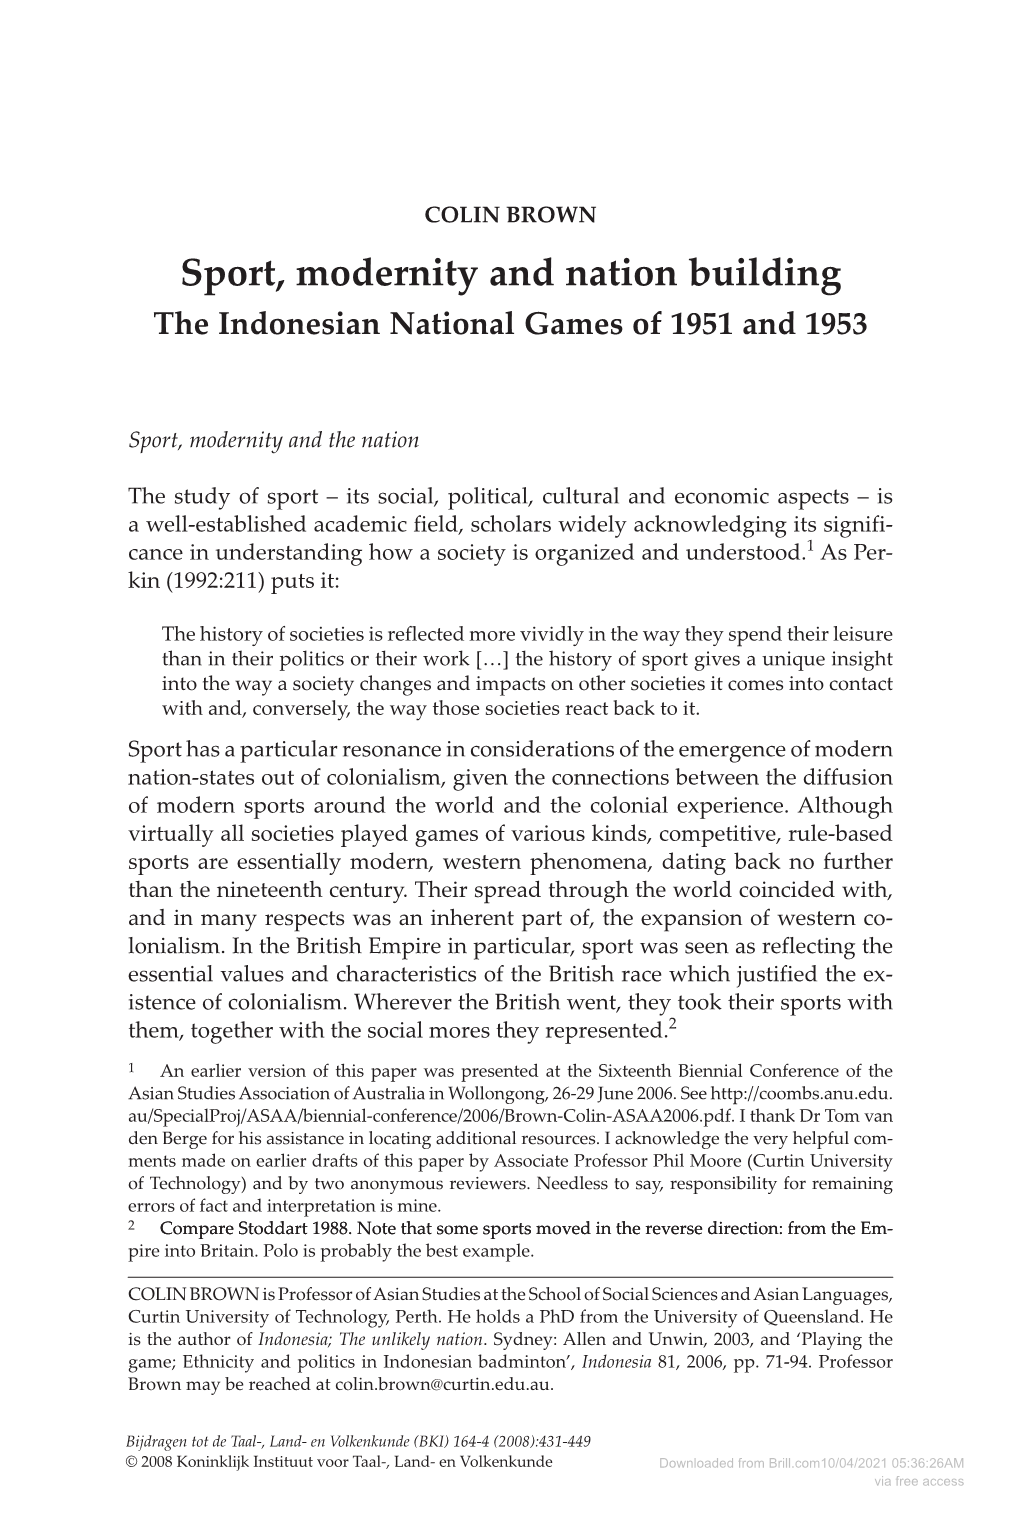 Sport, Modernity and Nation Building the Indonesian National Games of 1951 and 1953